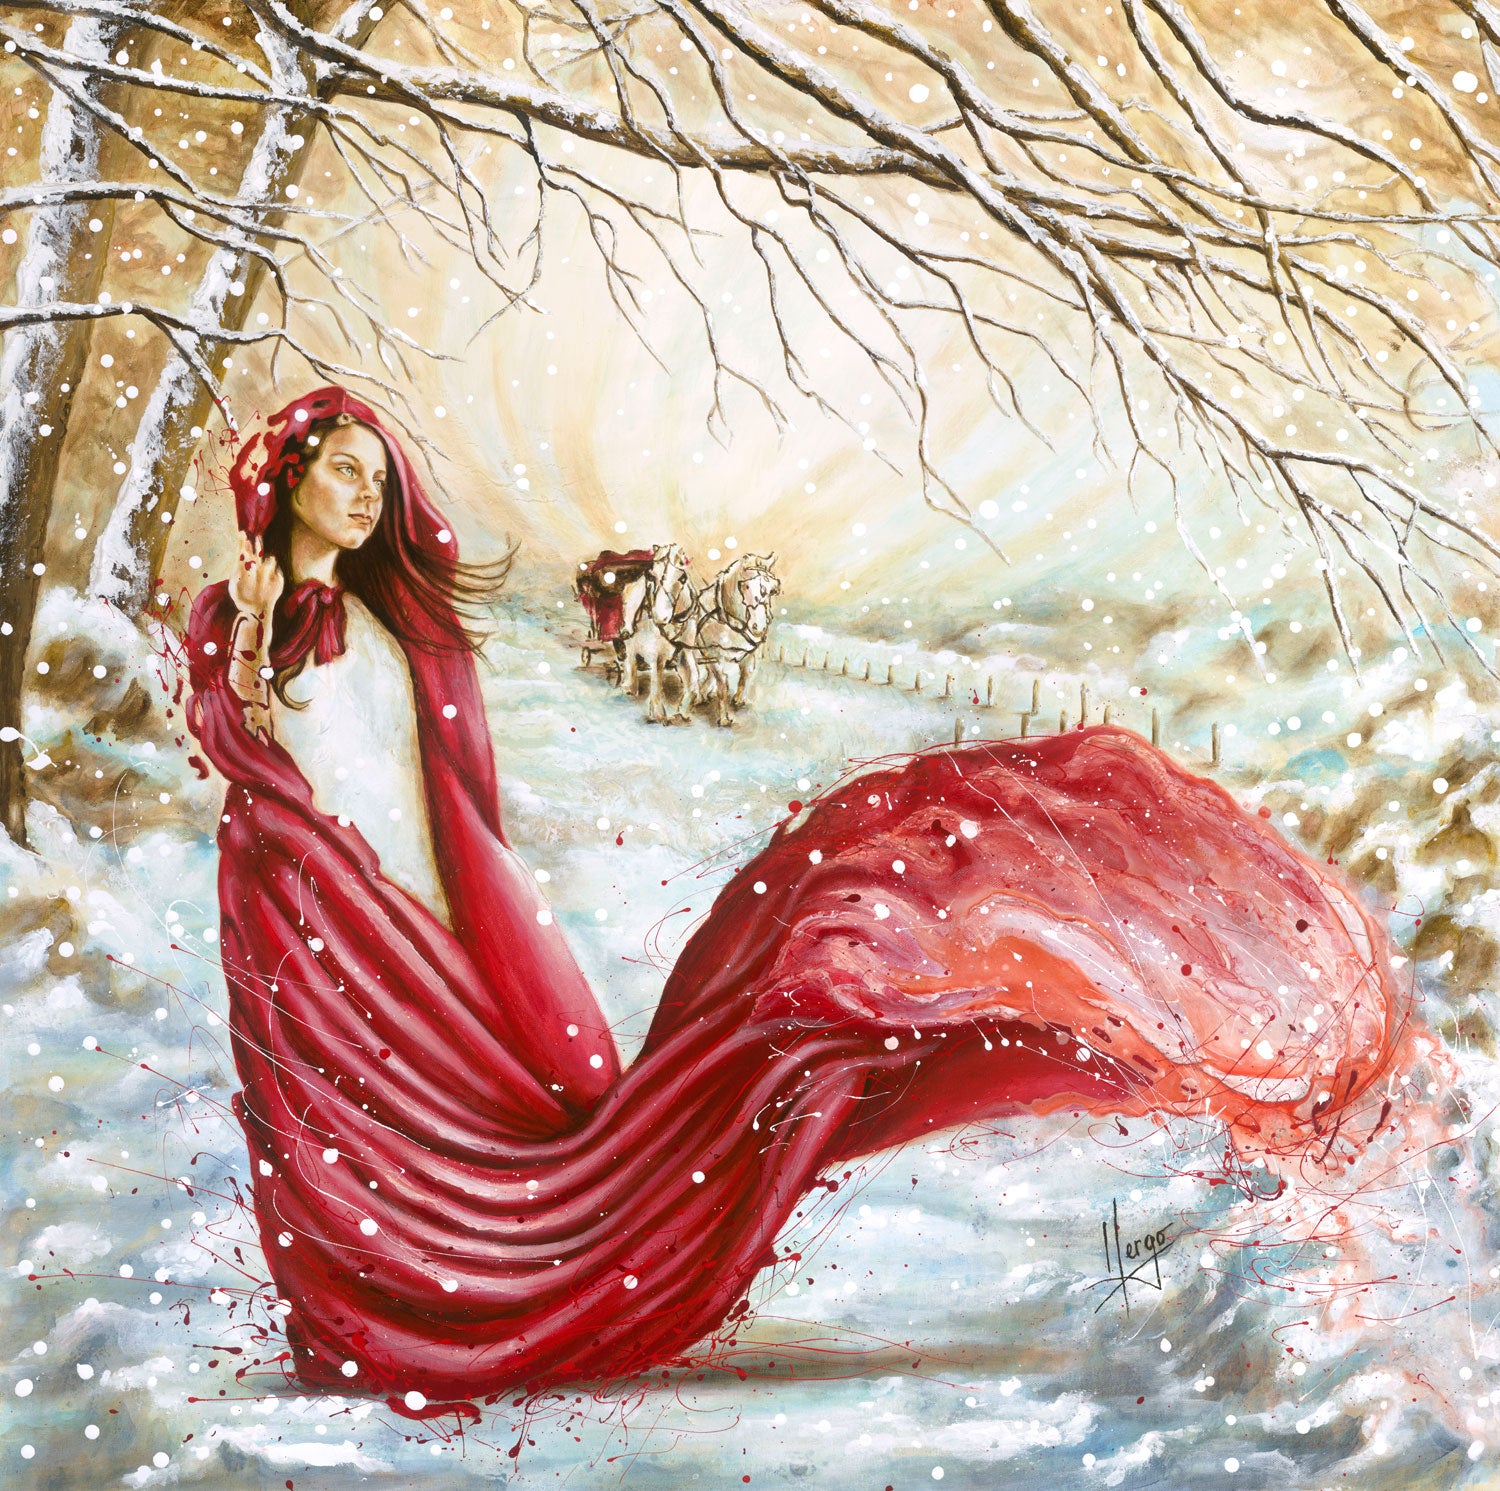 "Winter scent" figure painting of a woman with red hood and cape on a winter landscape, snow, and horse